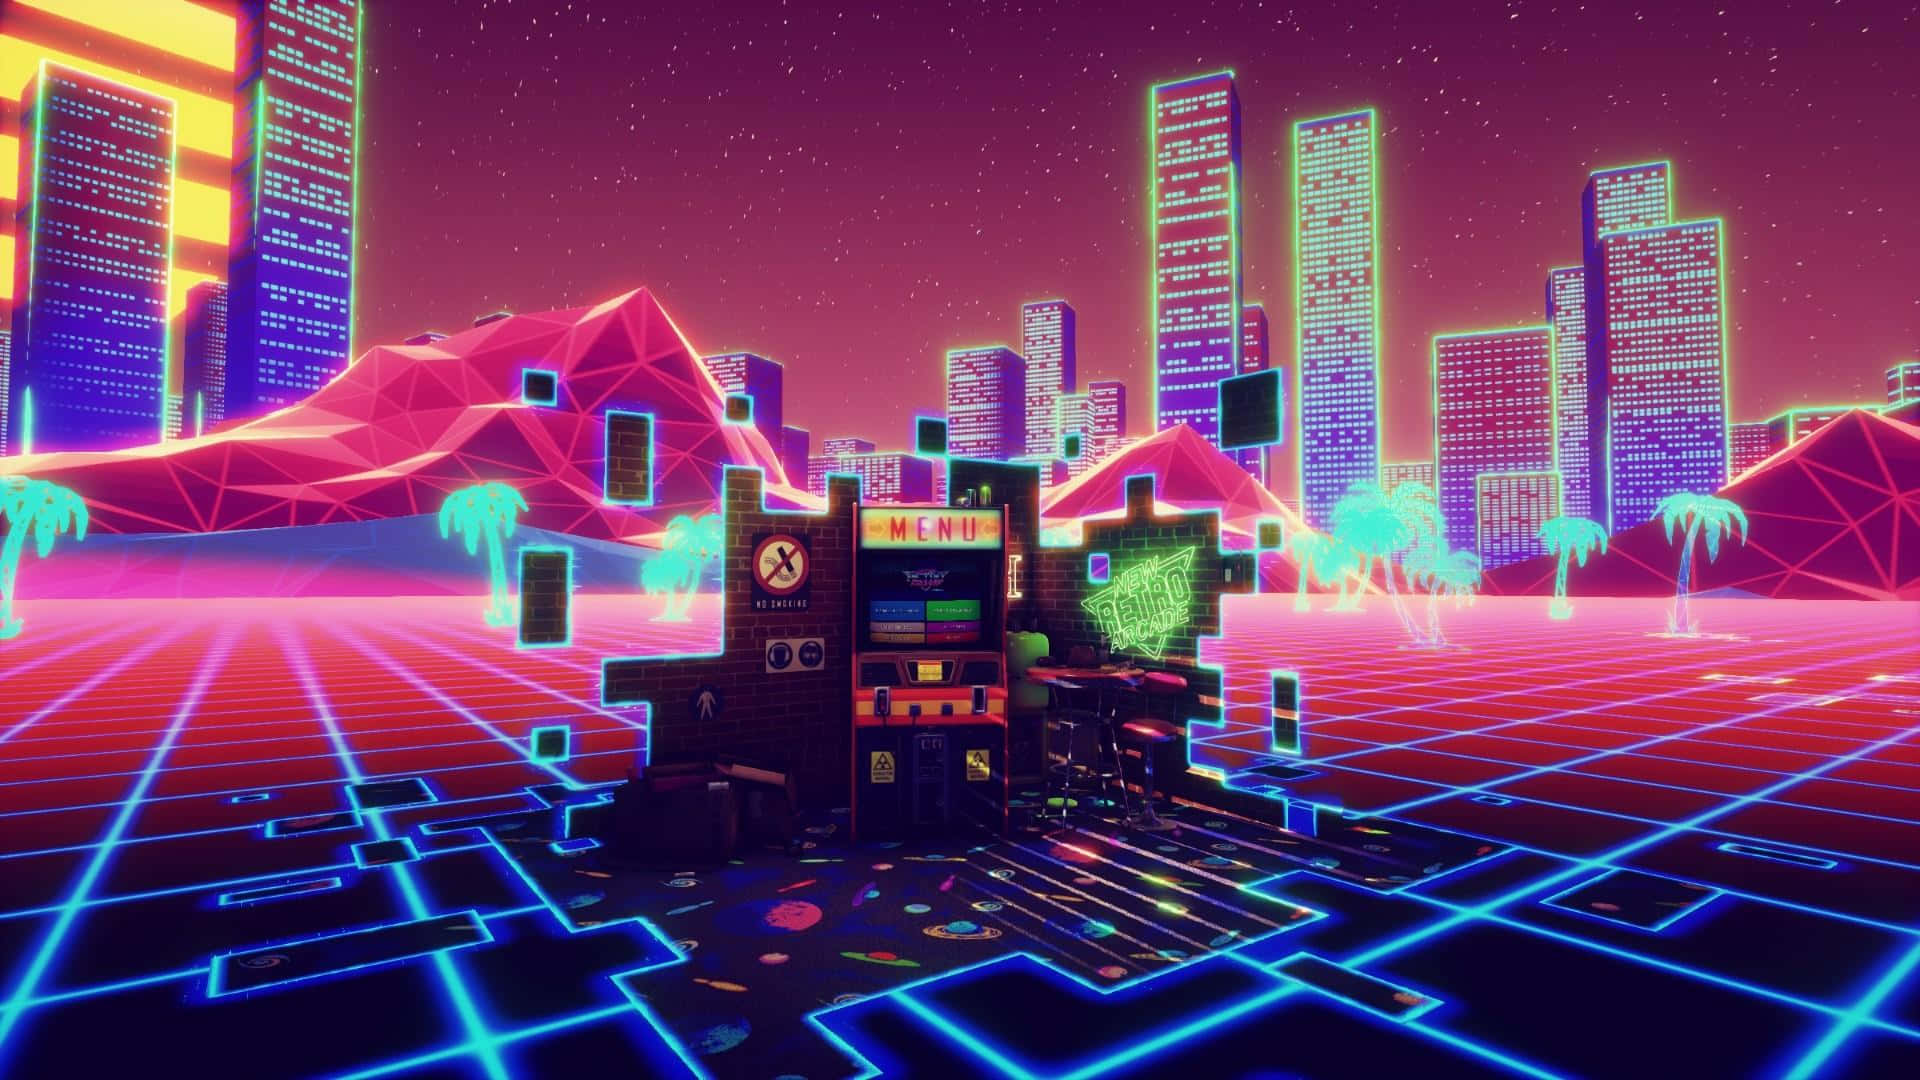 Enjoy a blast from the past in this vibrant arcade aesthetic Wallpaper